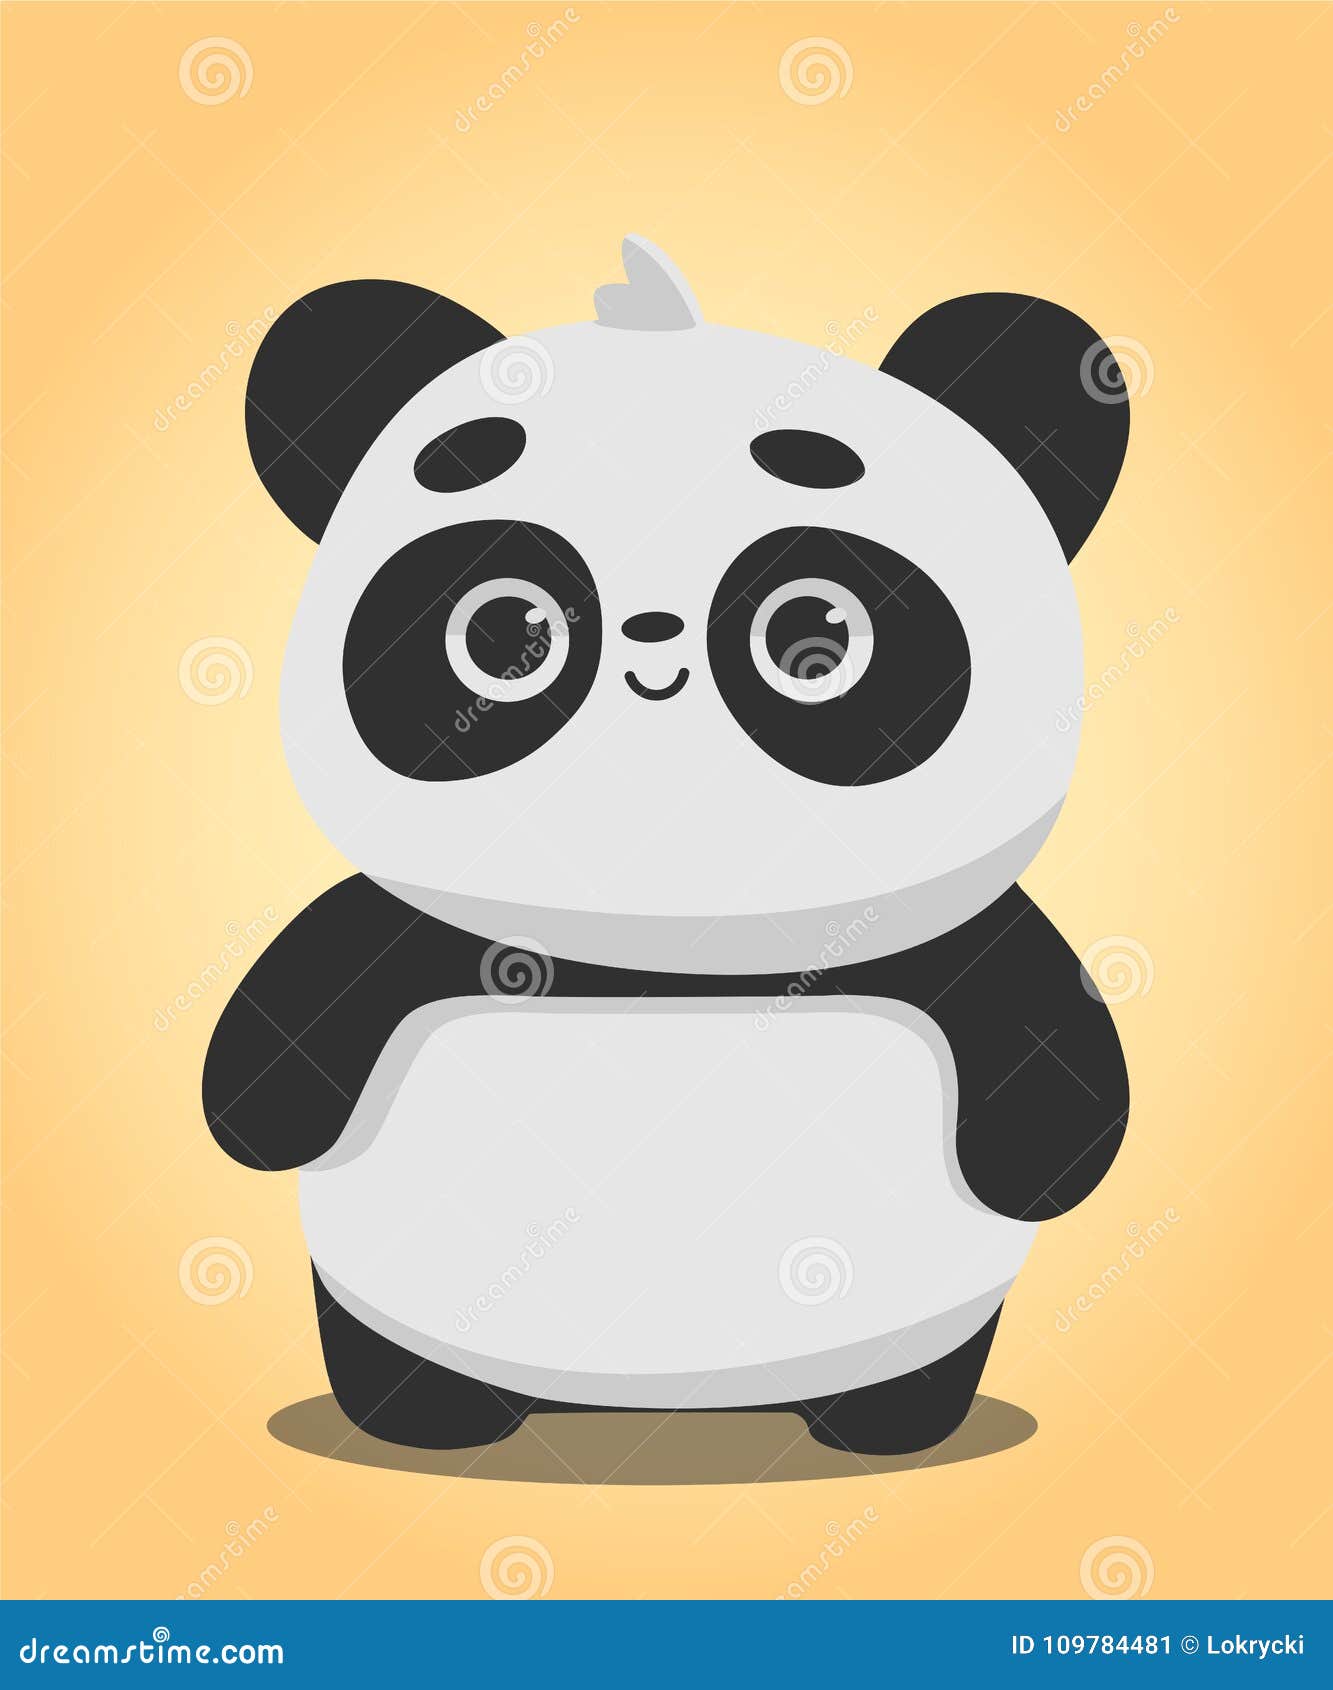 Cute Smiling Panda On Yellow Background Vector Illustration Stock Vector Illustration Of Illustrator Quality